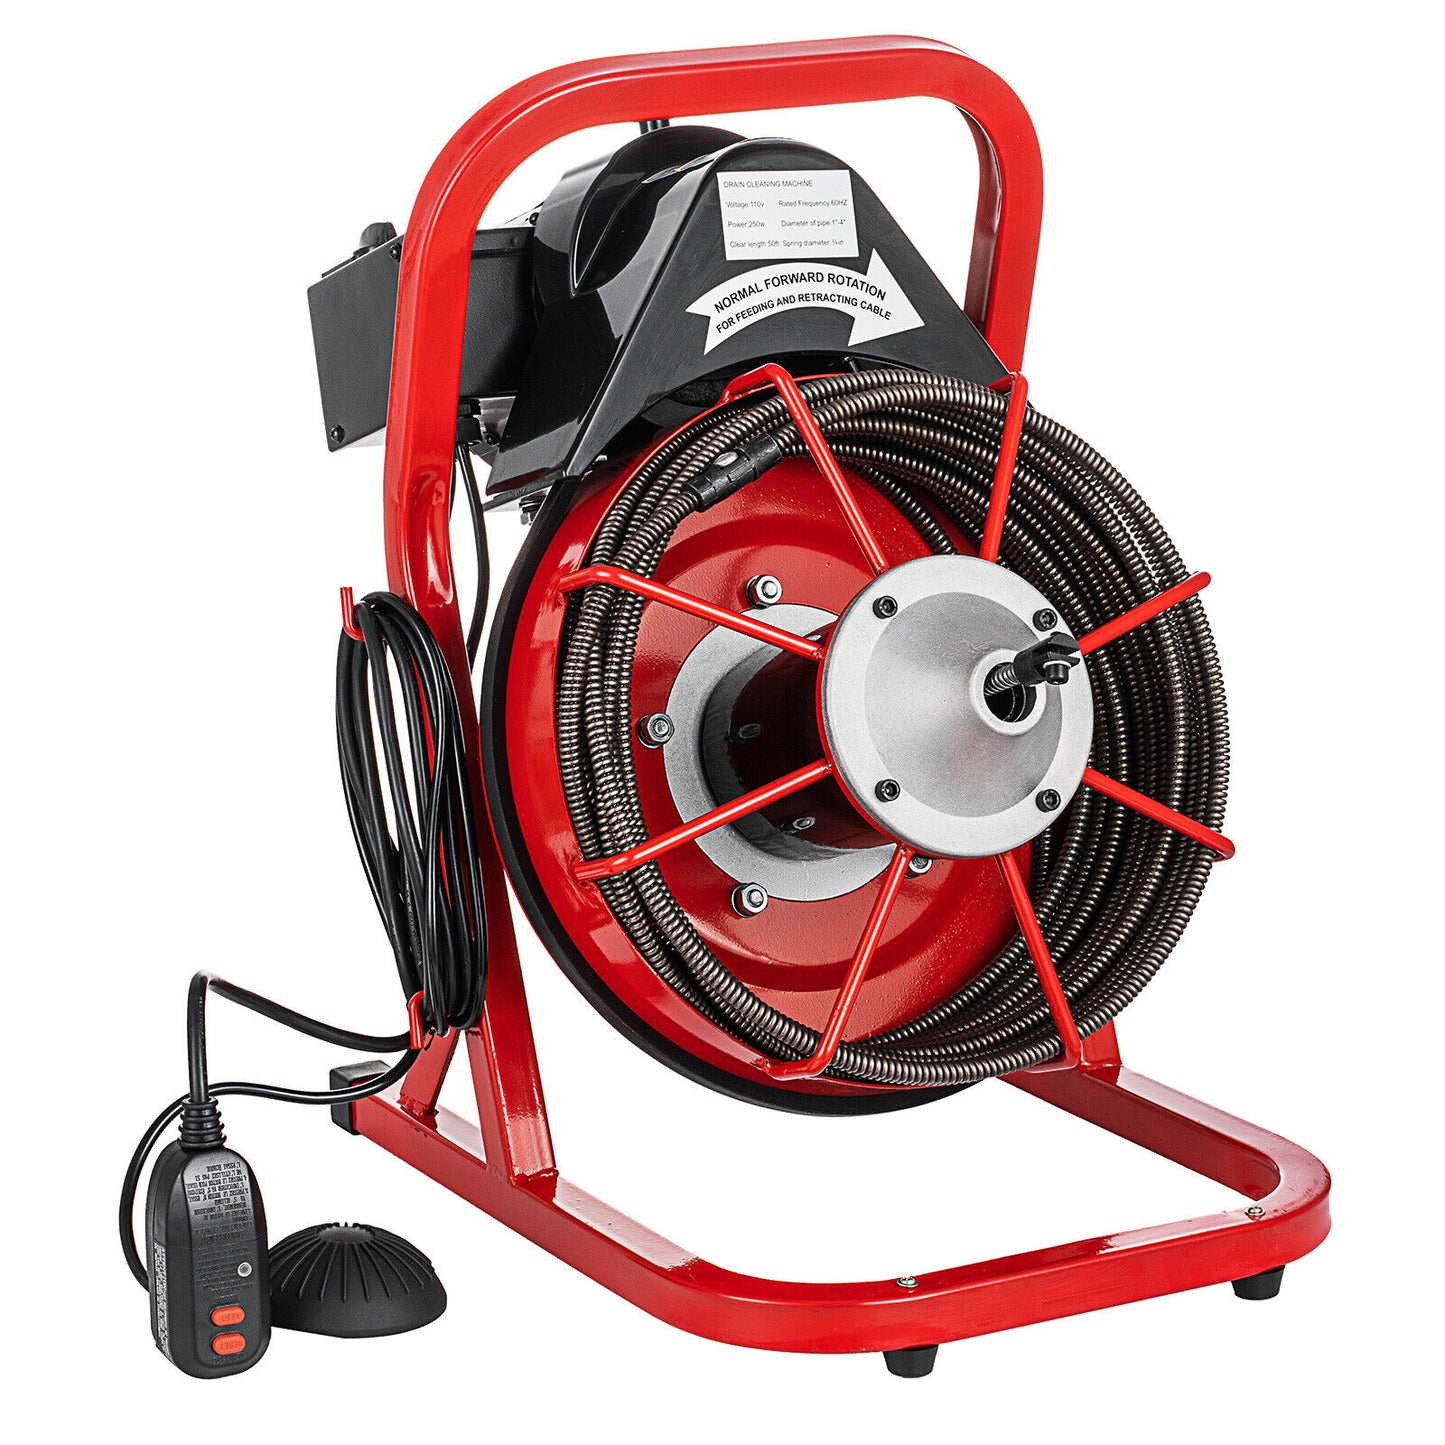 Electric 250W Drain Auger Cleaner 50'x3/8" Sewer Snake Drain Cleaning Machine